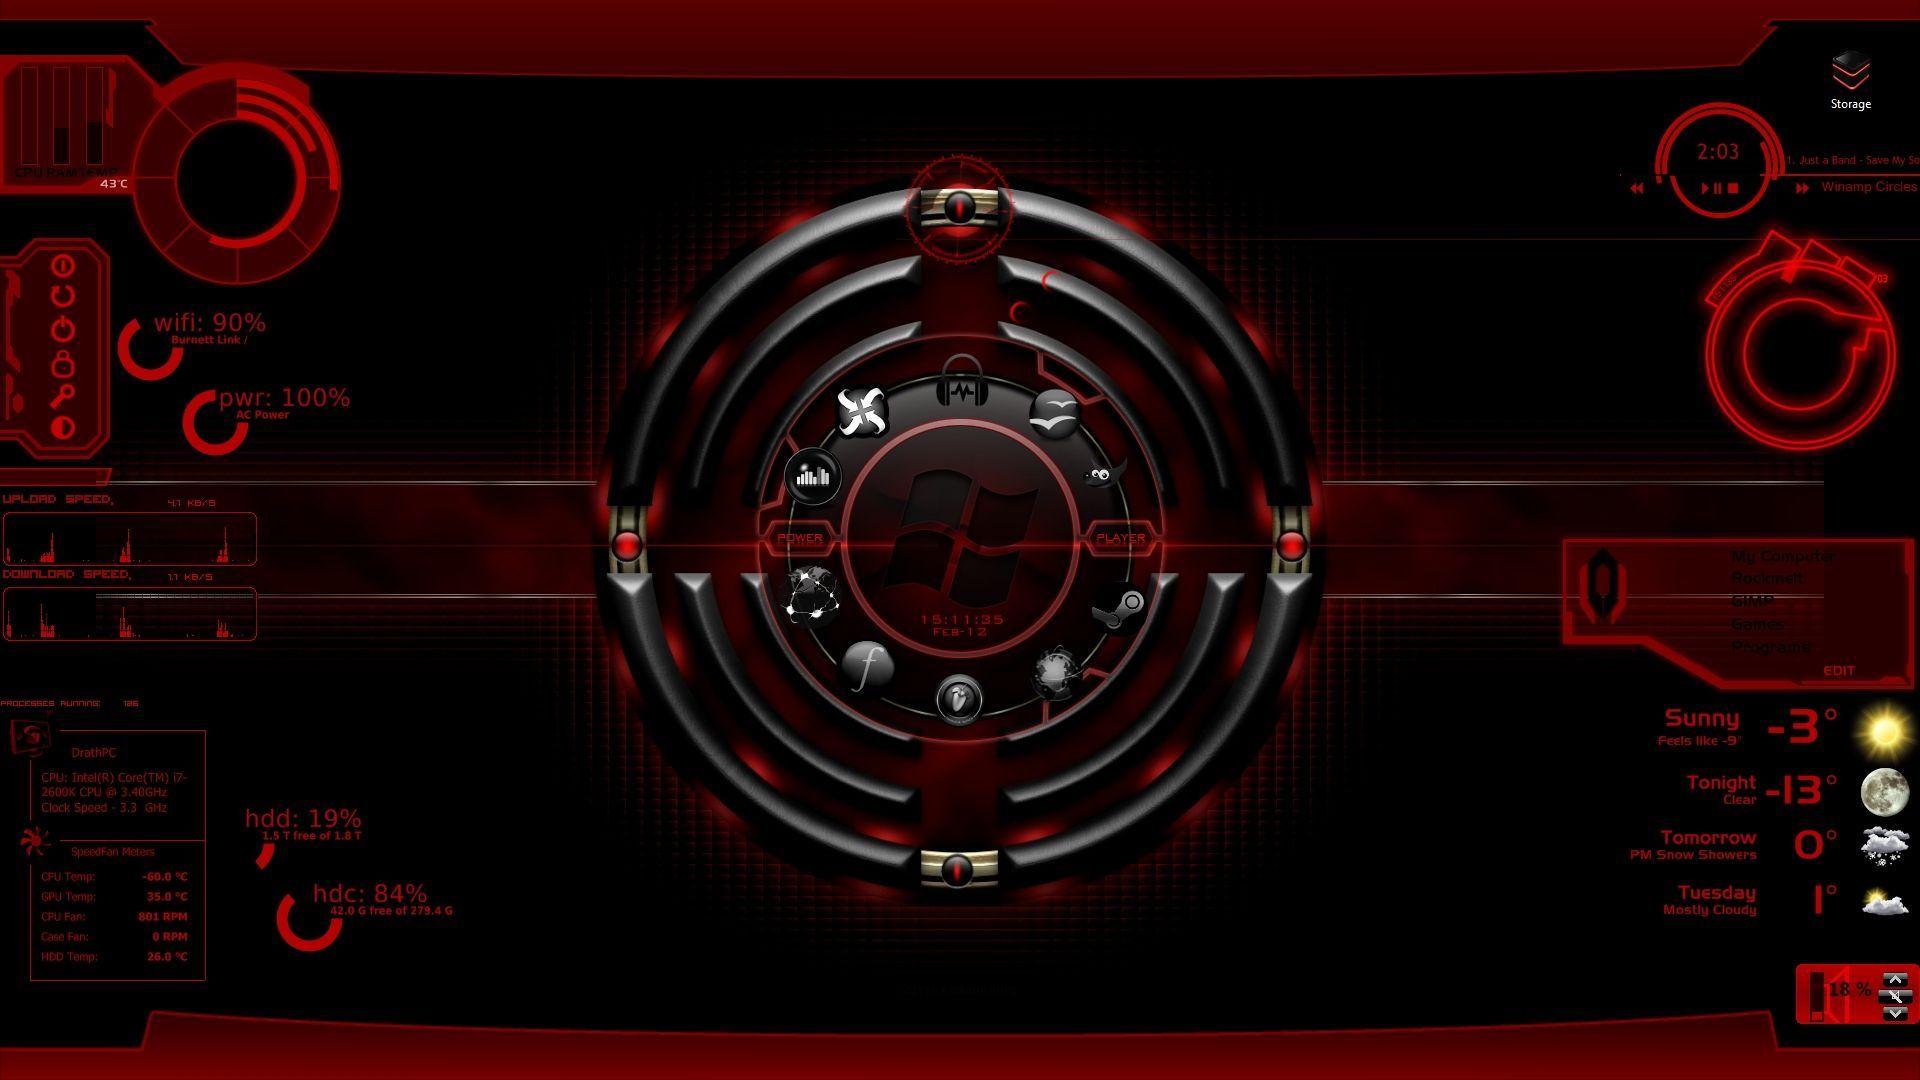 Black Windows Red Logo - Red Black Windows 7 | Red and Black | Places to visit, Wallpaper, Red